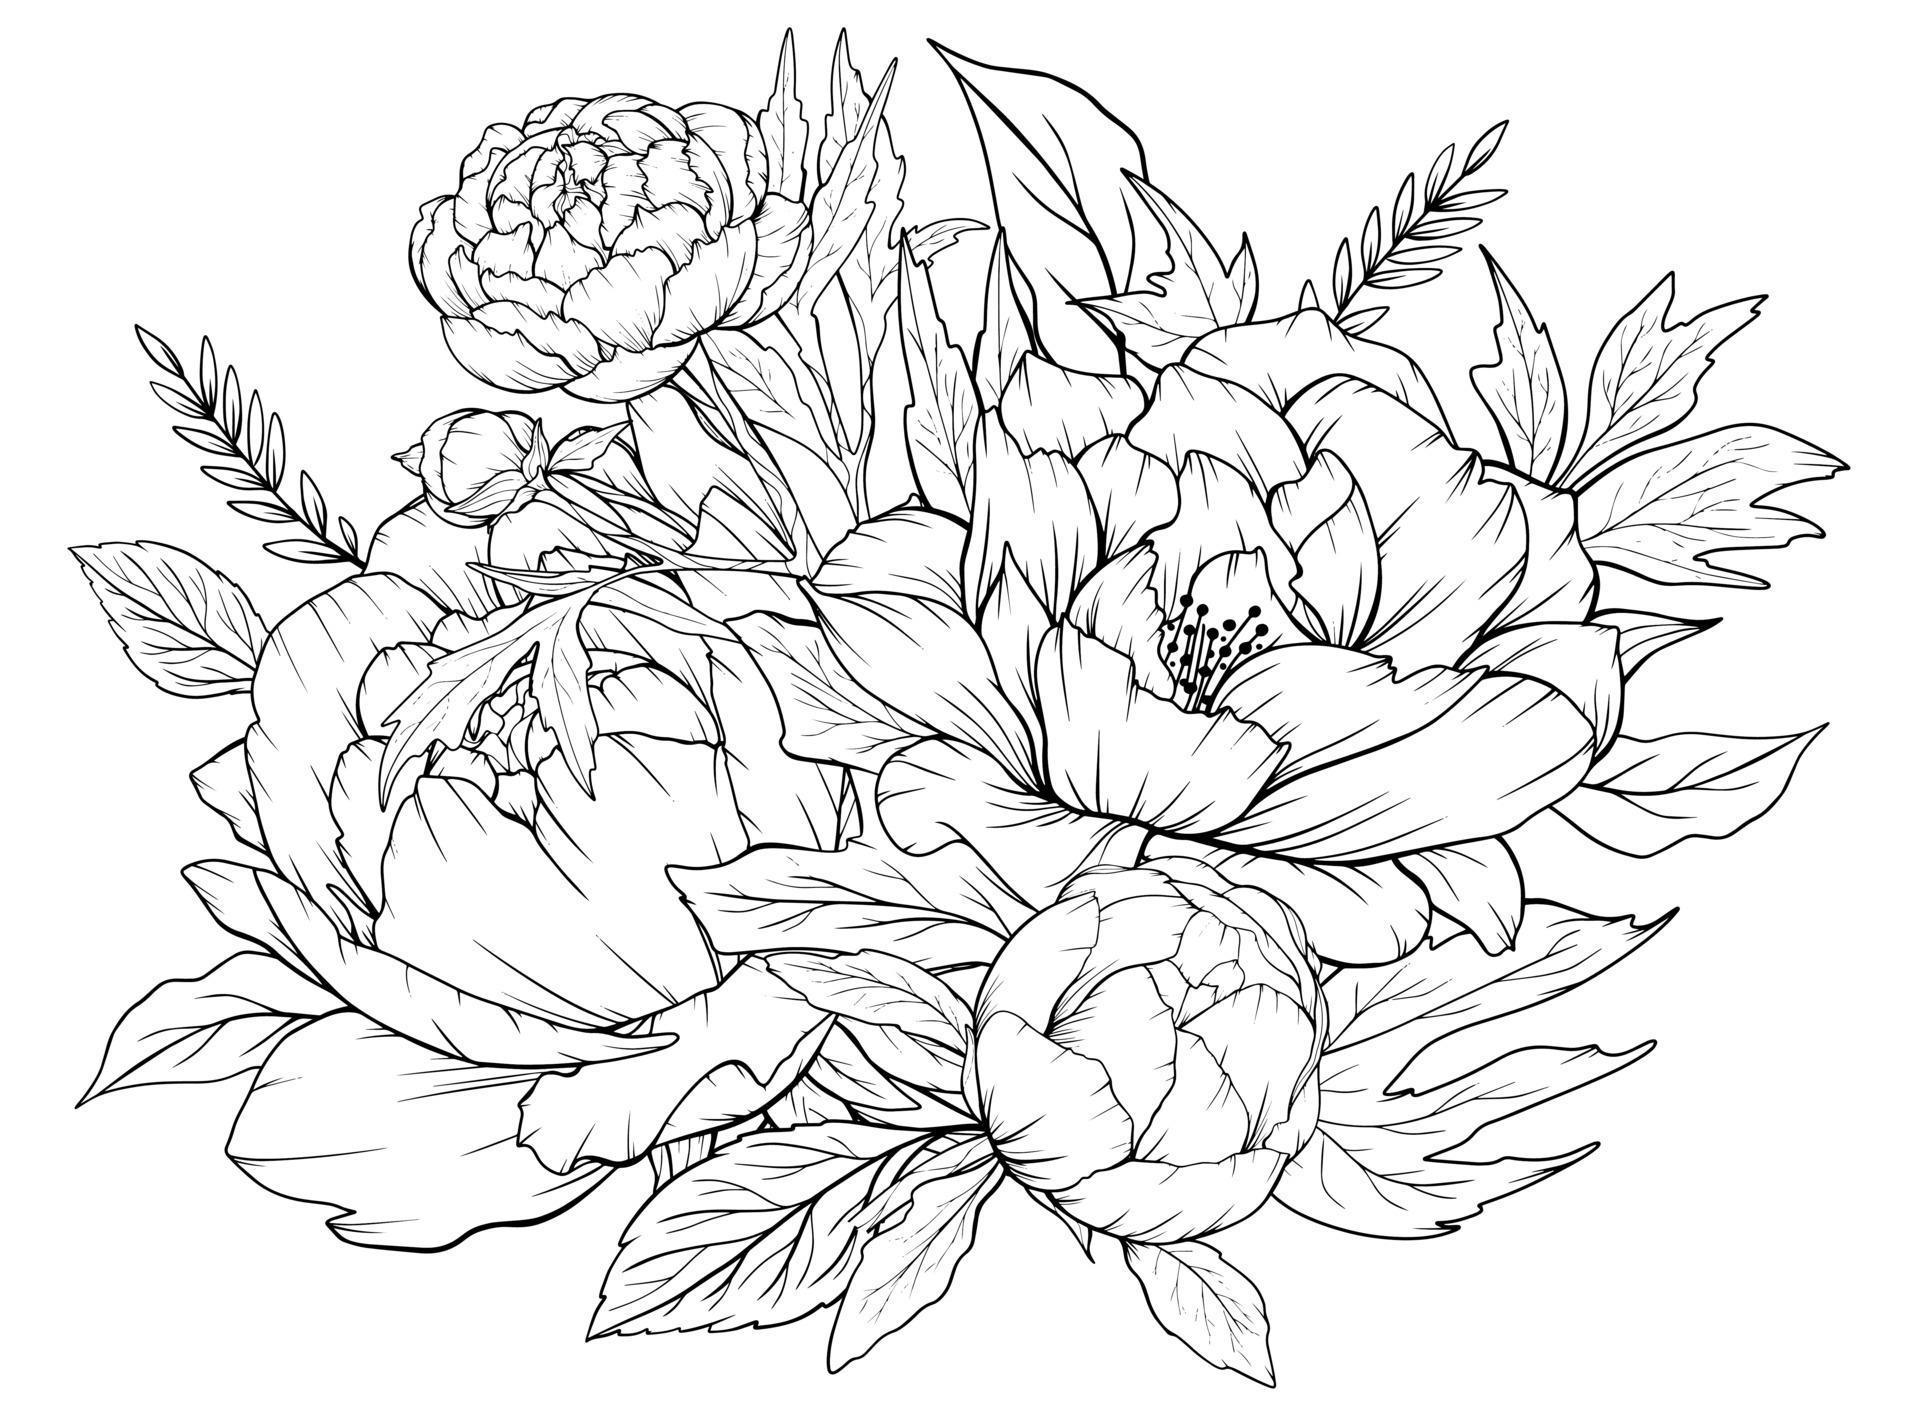 Coloring page with peonies and leaves. Vector page for coloring. Flower